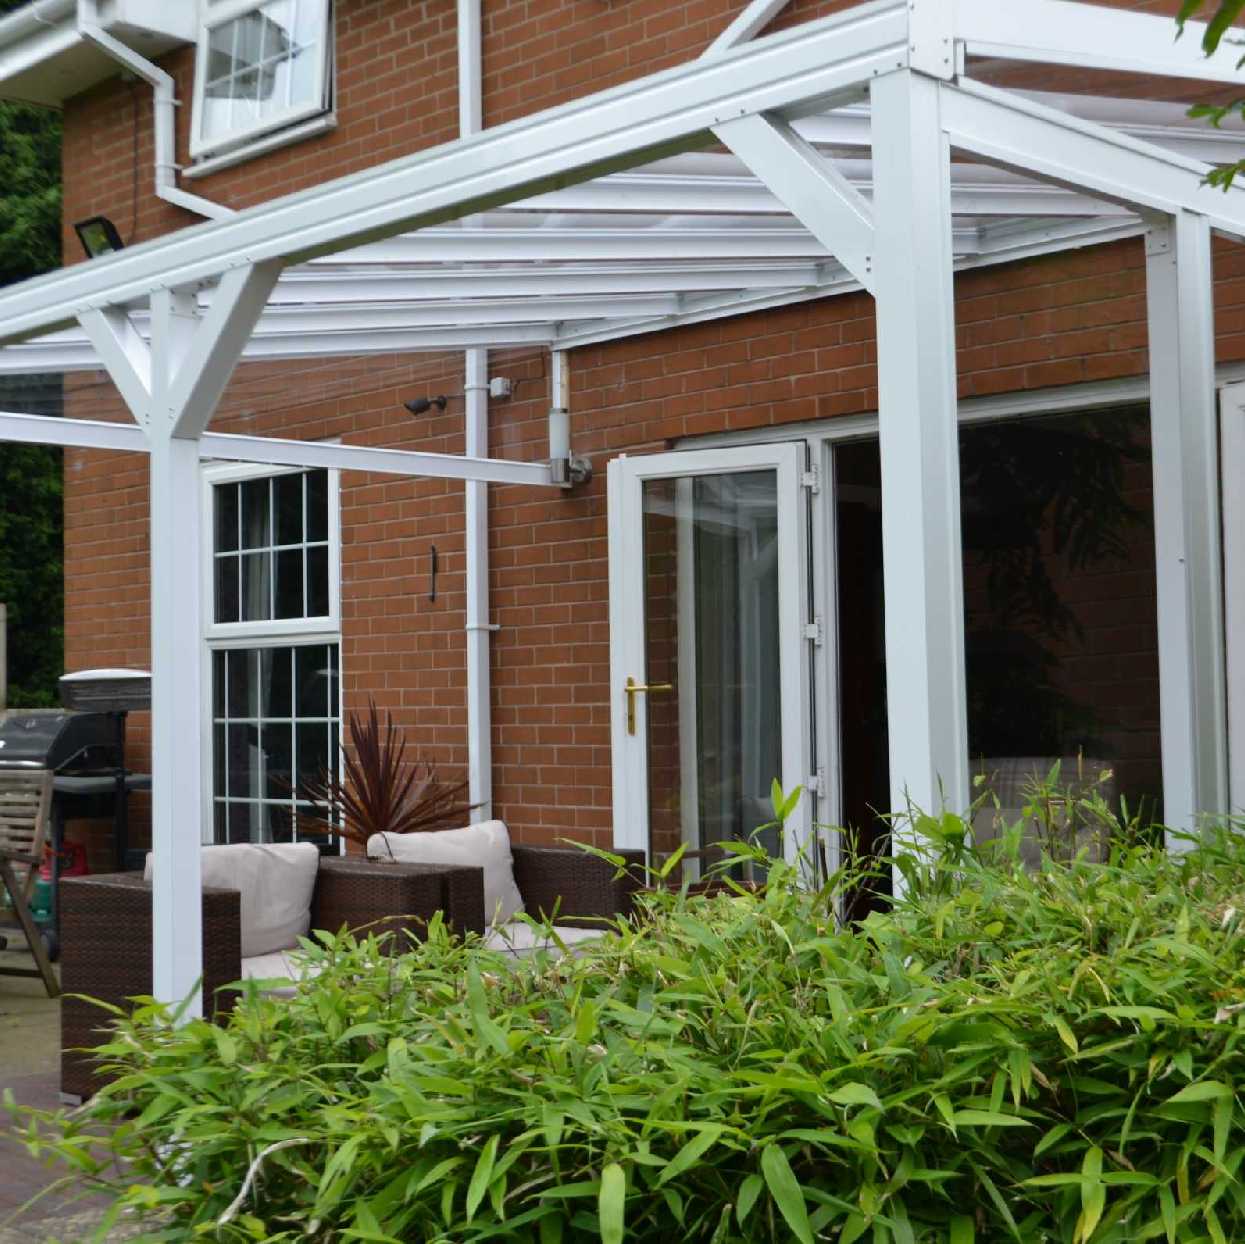 Omega Smart Lean-To Canopy, White with 6mm Glass Clear Plate Polycarbonate Glazing - 6.3m (W) x 2.0m (P), (4) Supporting Posts from Omega Build